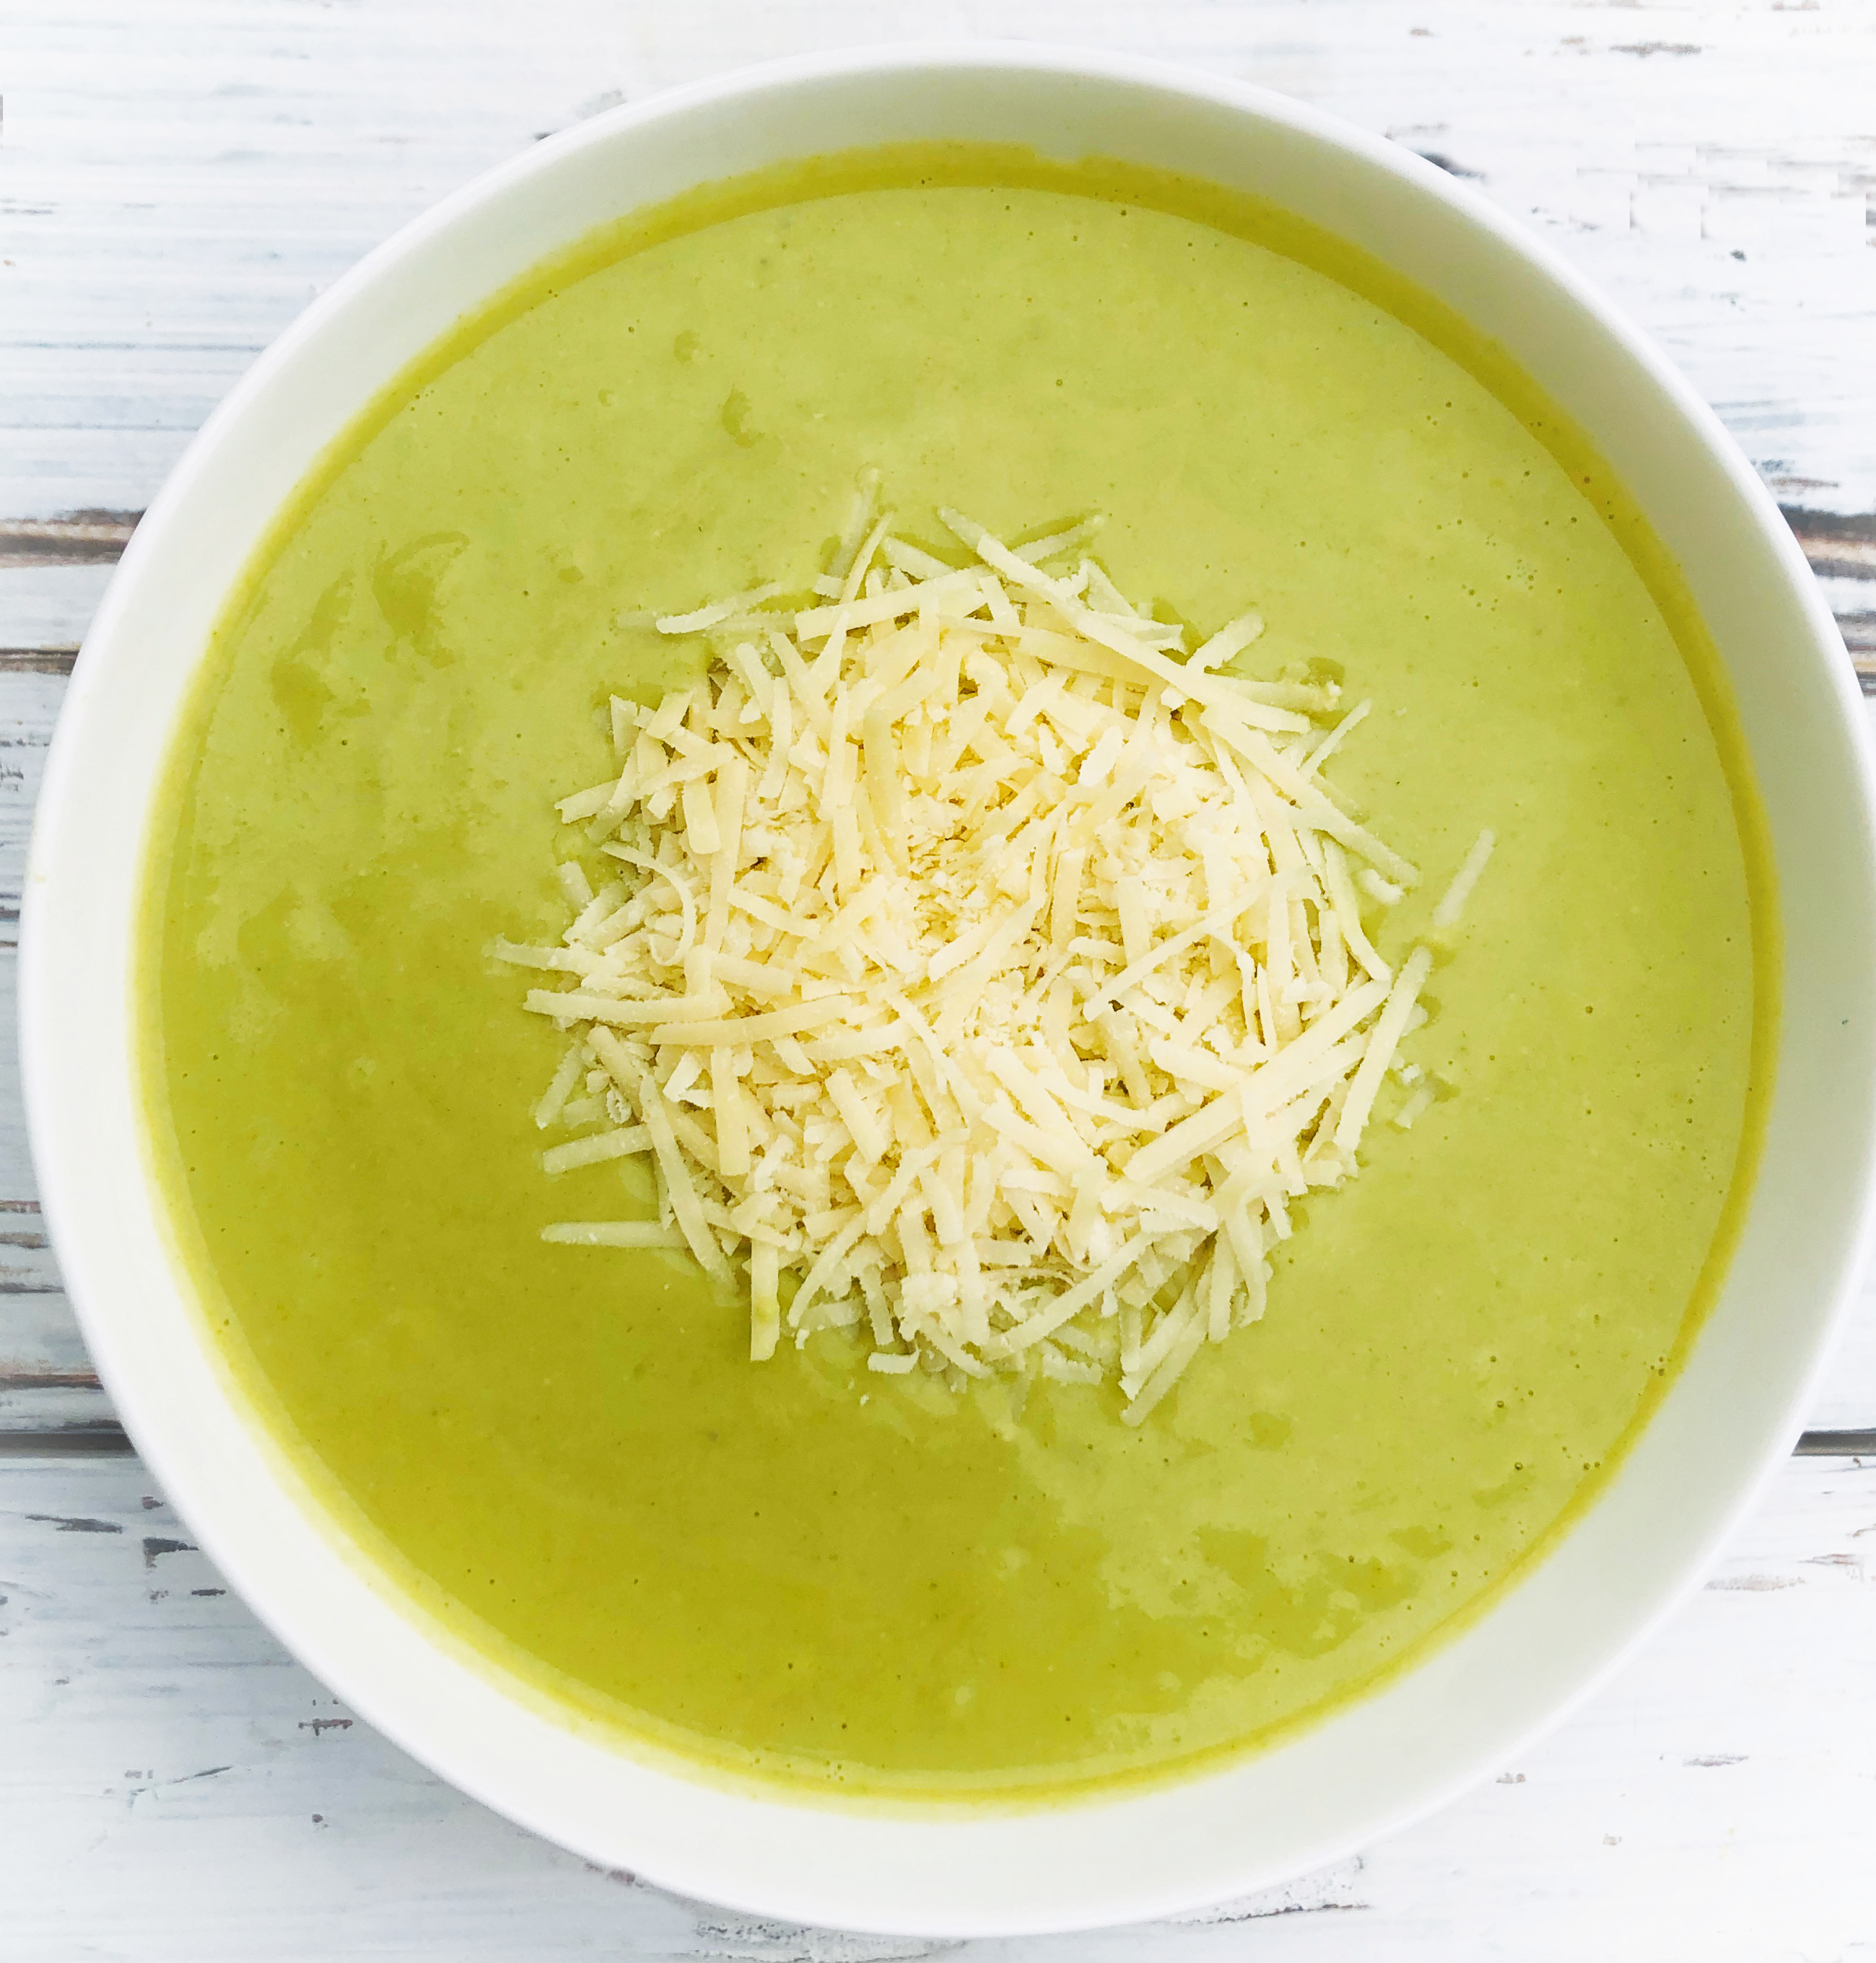 Vegan Broccoli and Parmesan Soup - Quick and easy - Creamy without feeling heavy - Packed with good-for-you ingredients - Ready to serve in 30 minutes or less! via @thiswifecooks